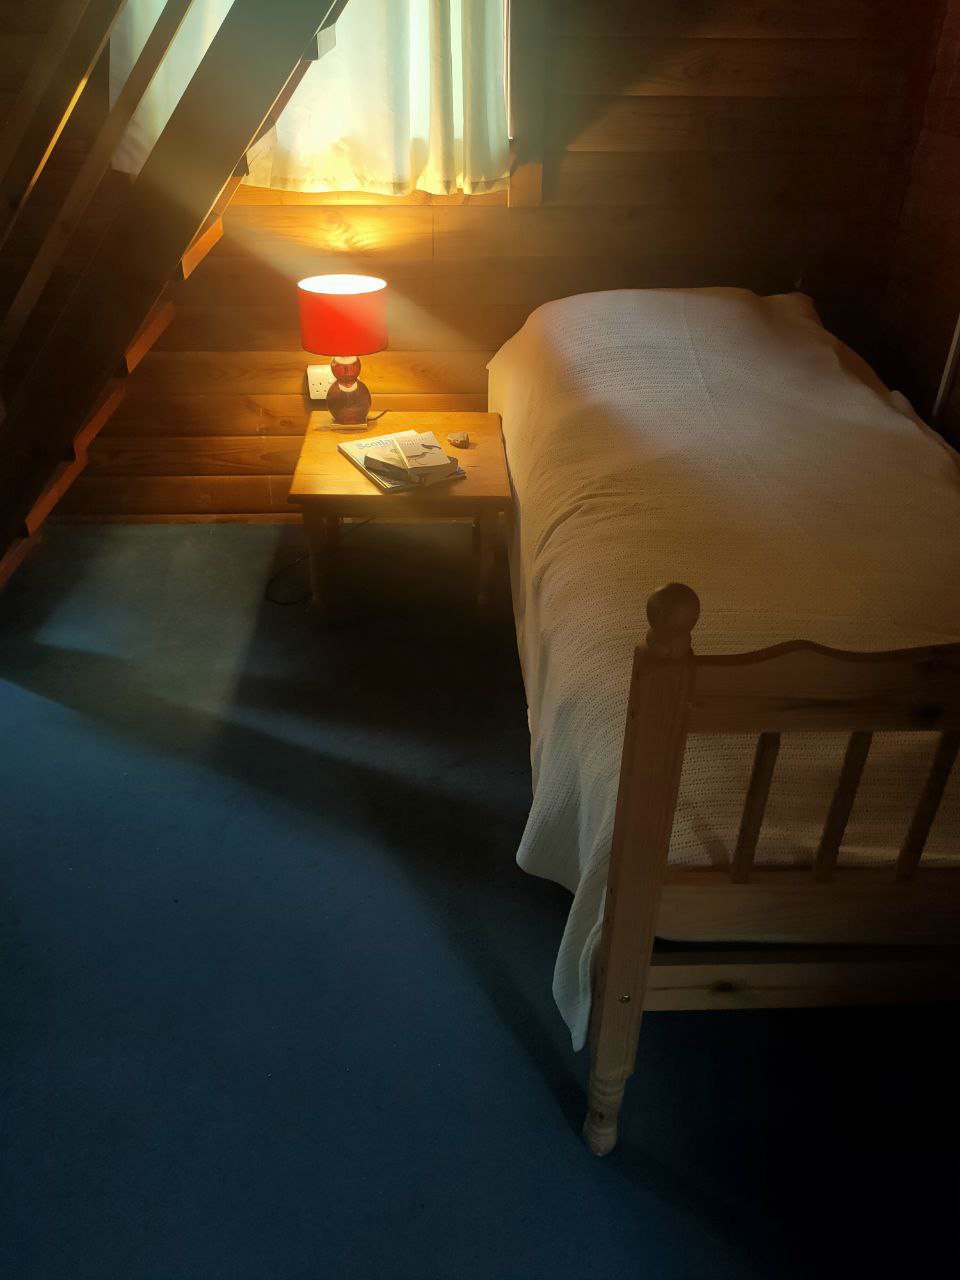 A single bed on the ground floor